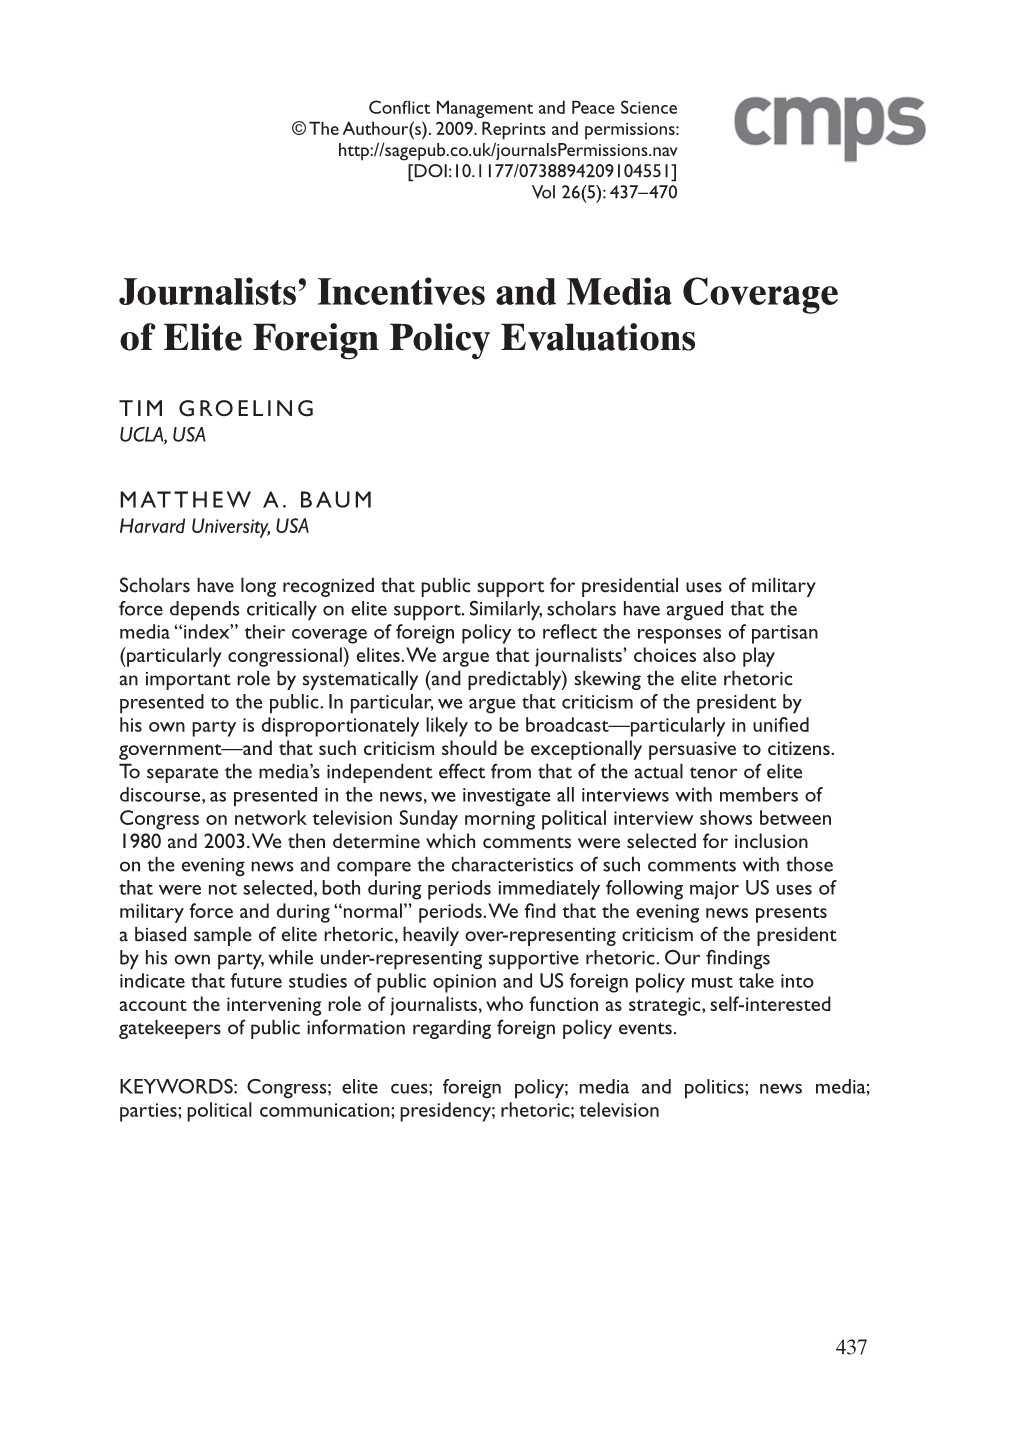 Journalists' Incentives and Media Coverage of Elite Foreign Policy